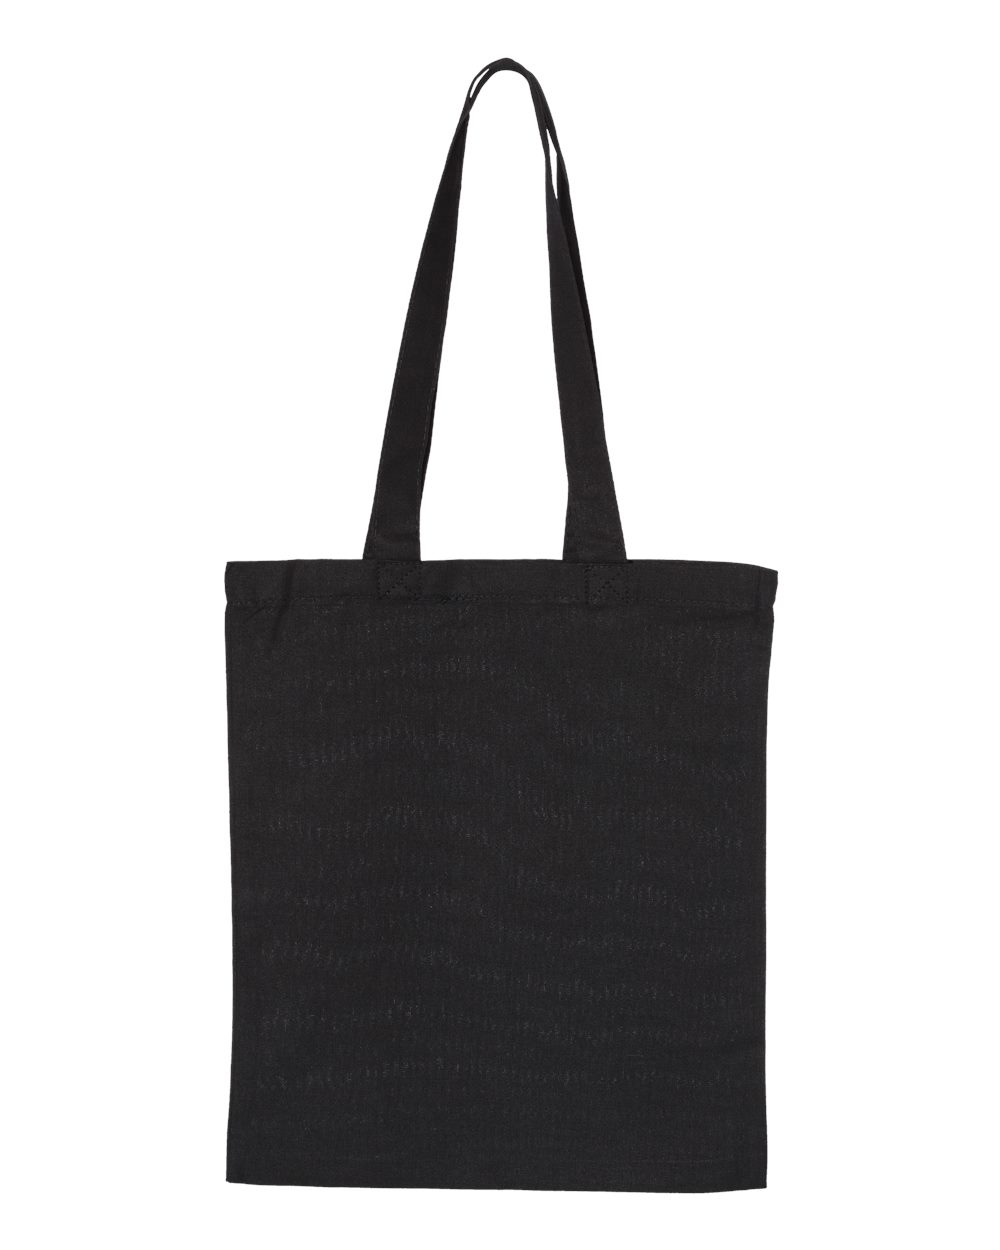 OAD Large Canvas Tote